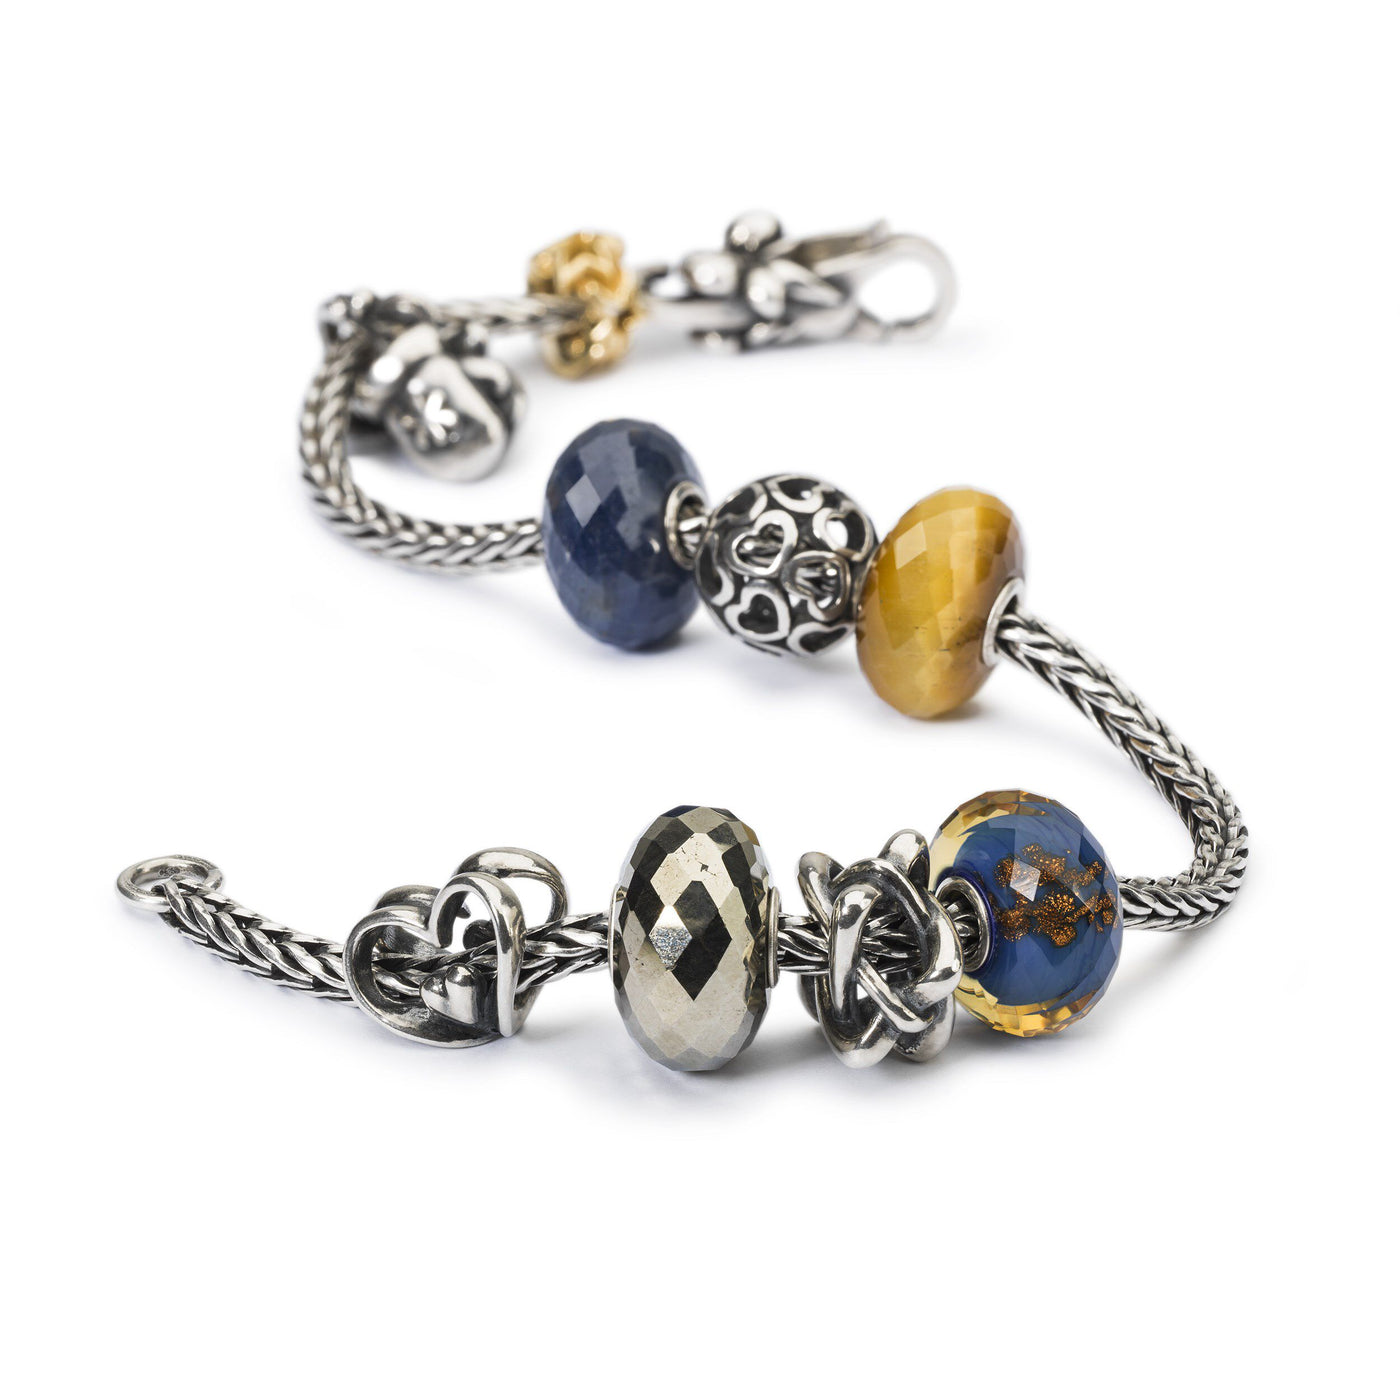 Come Together - Trollbeads Canada